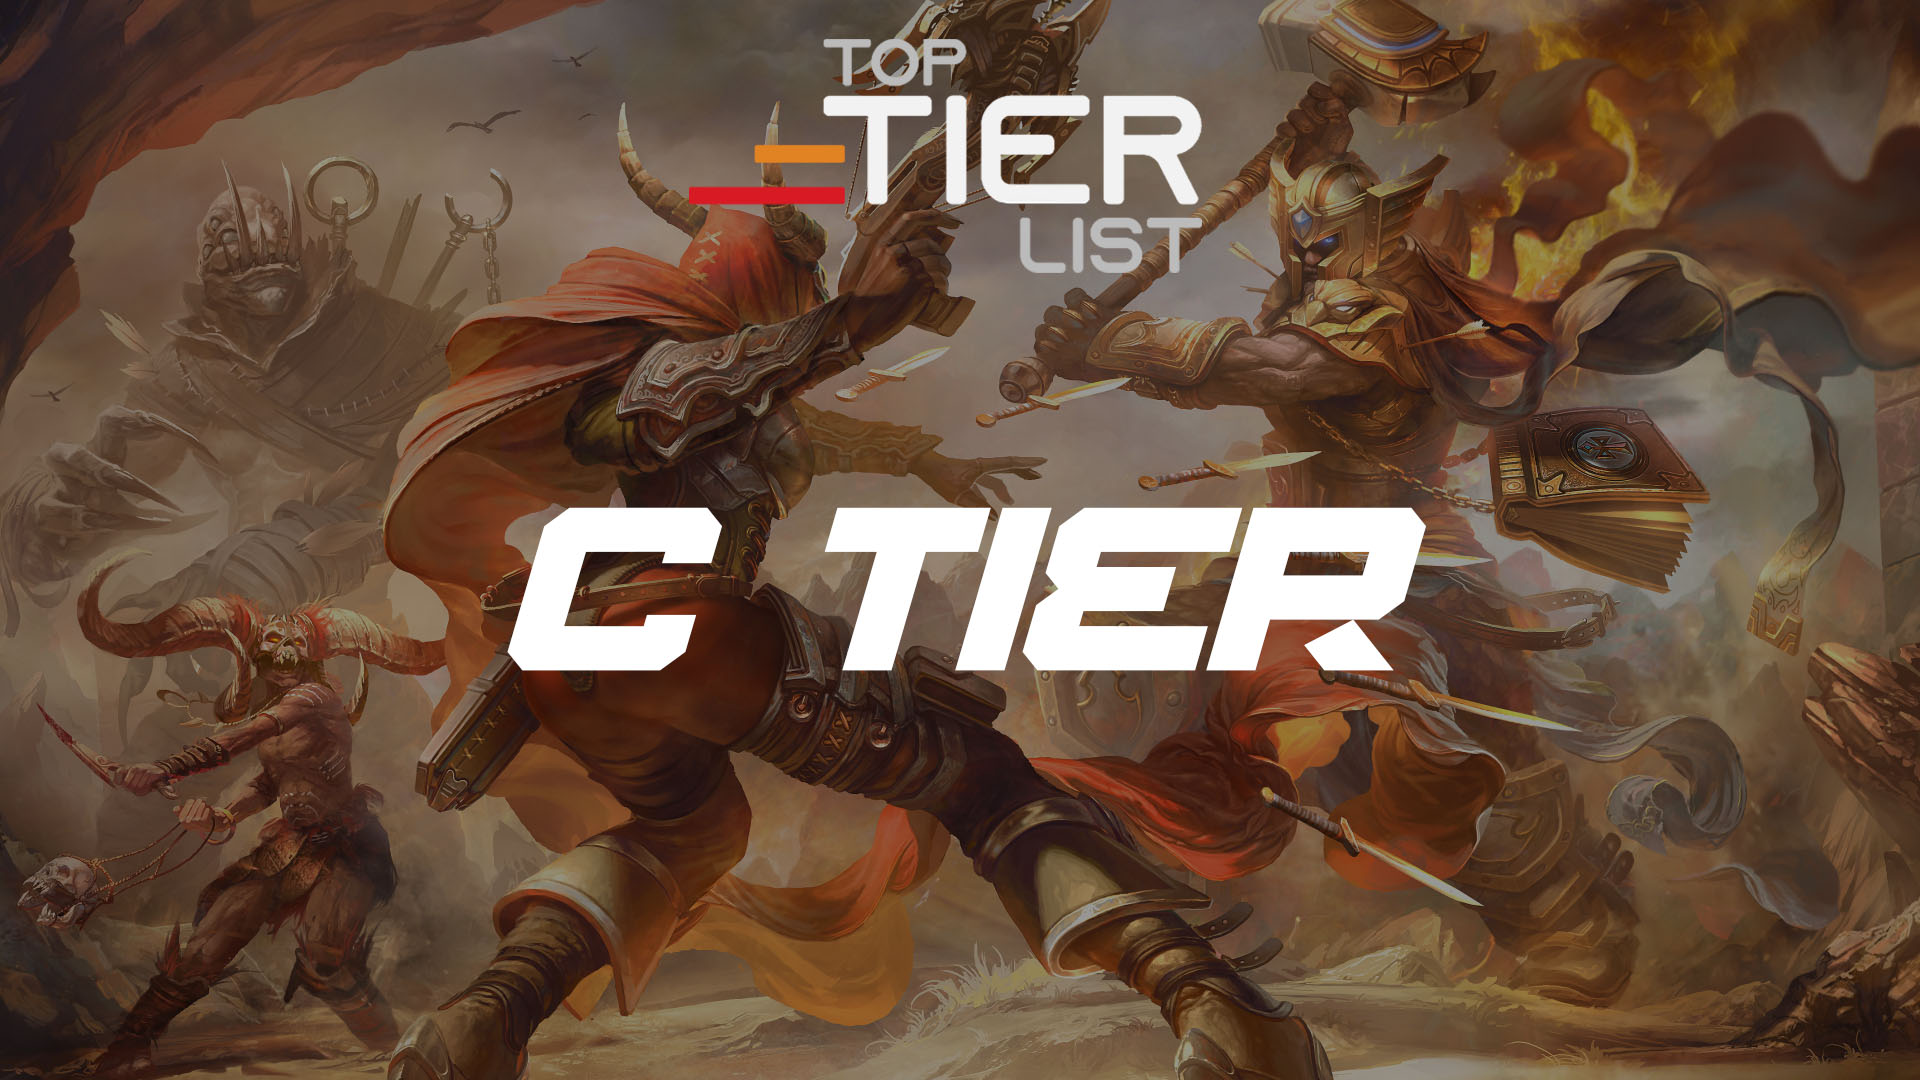 Notable Heroes in the HOTS Tier List